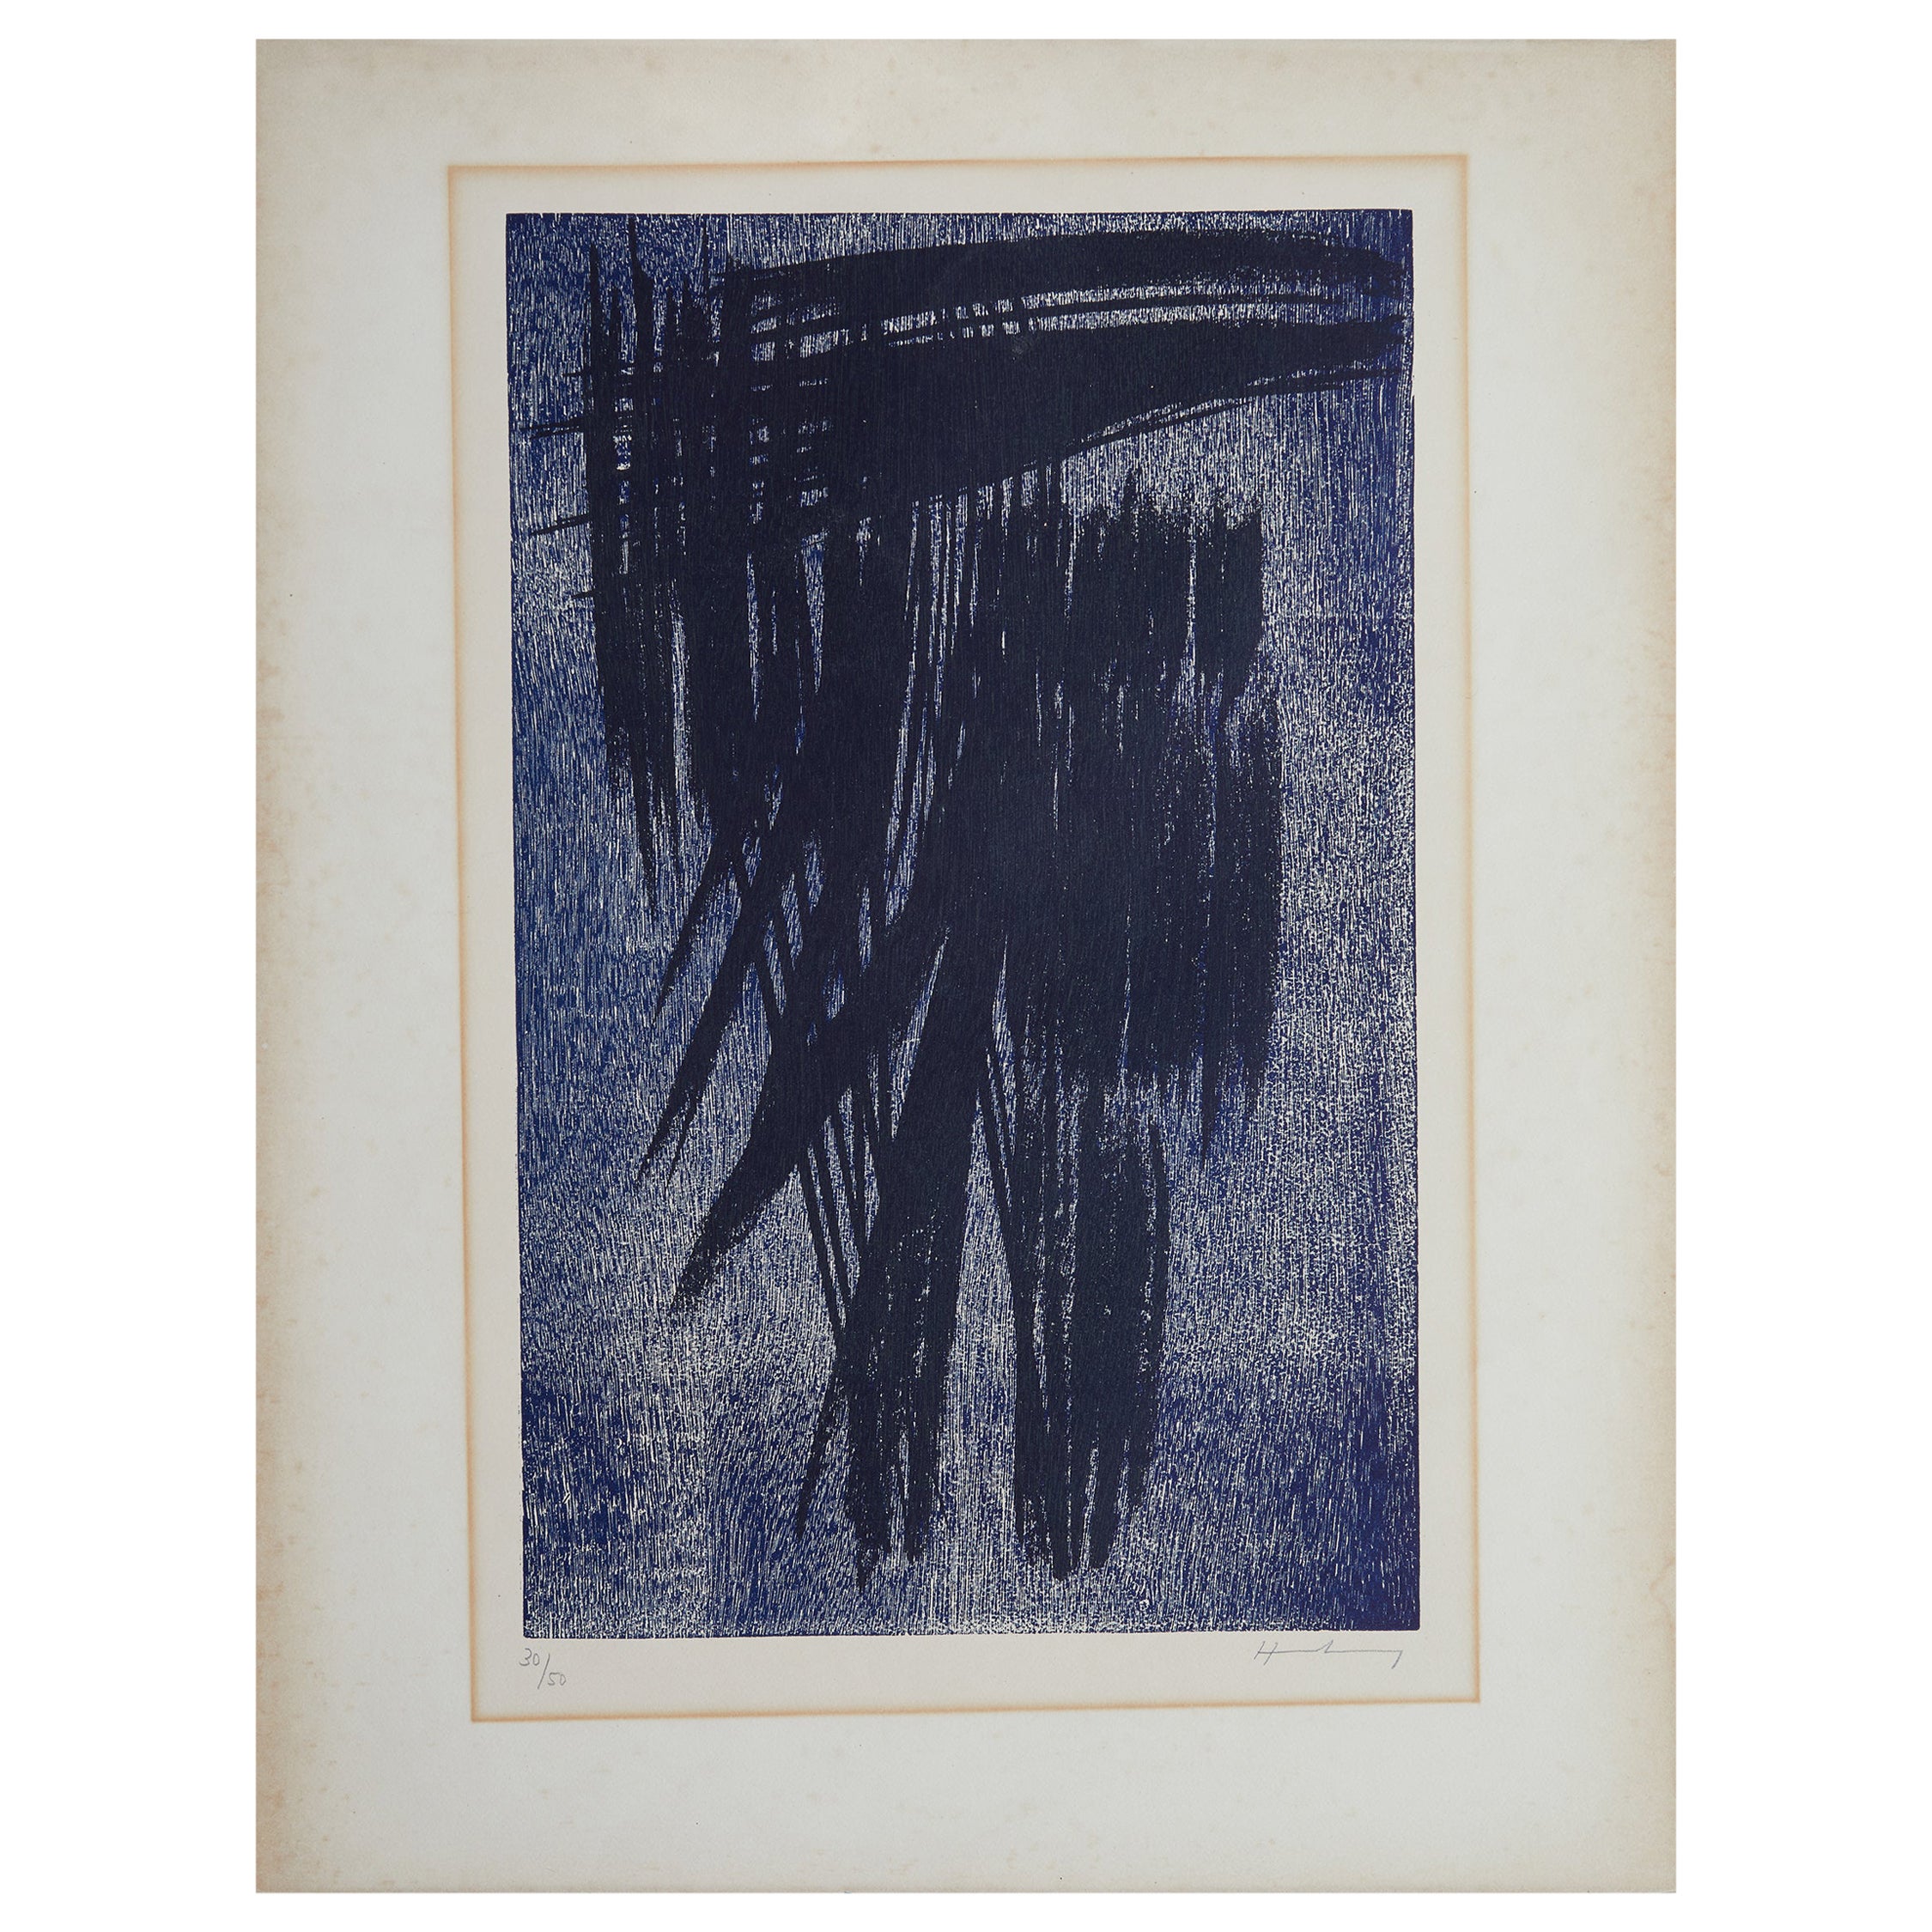 Lithography "Bois" by Hans Hartung